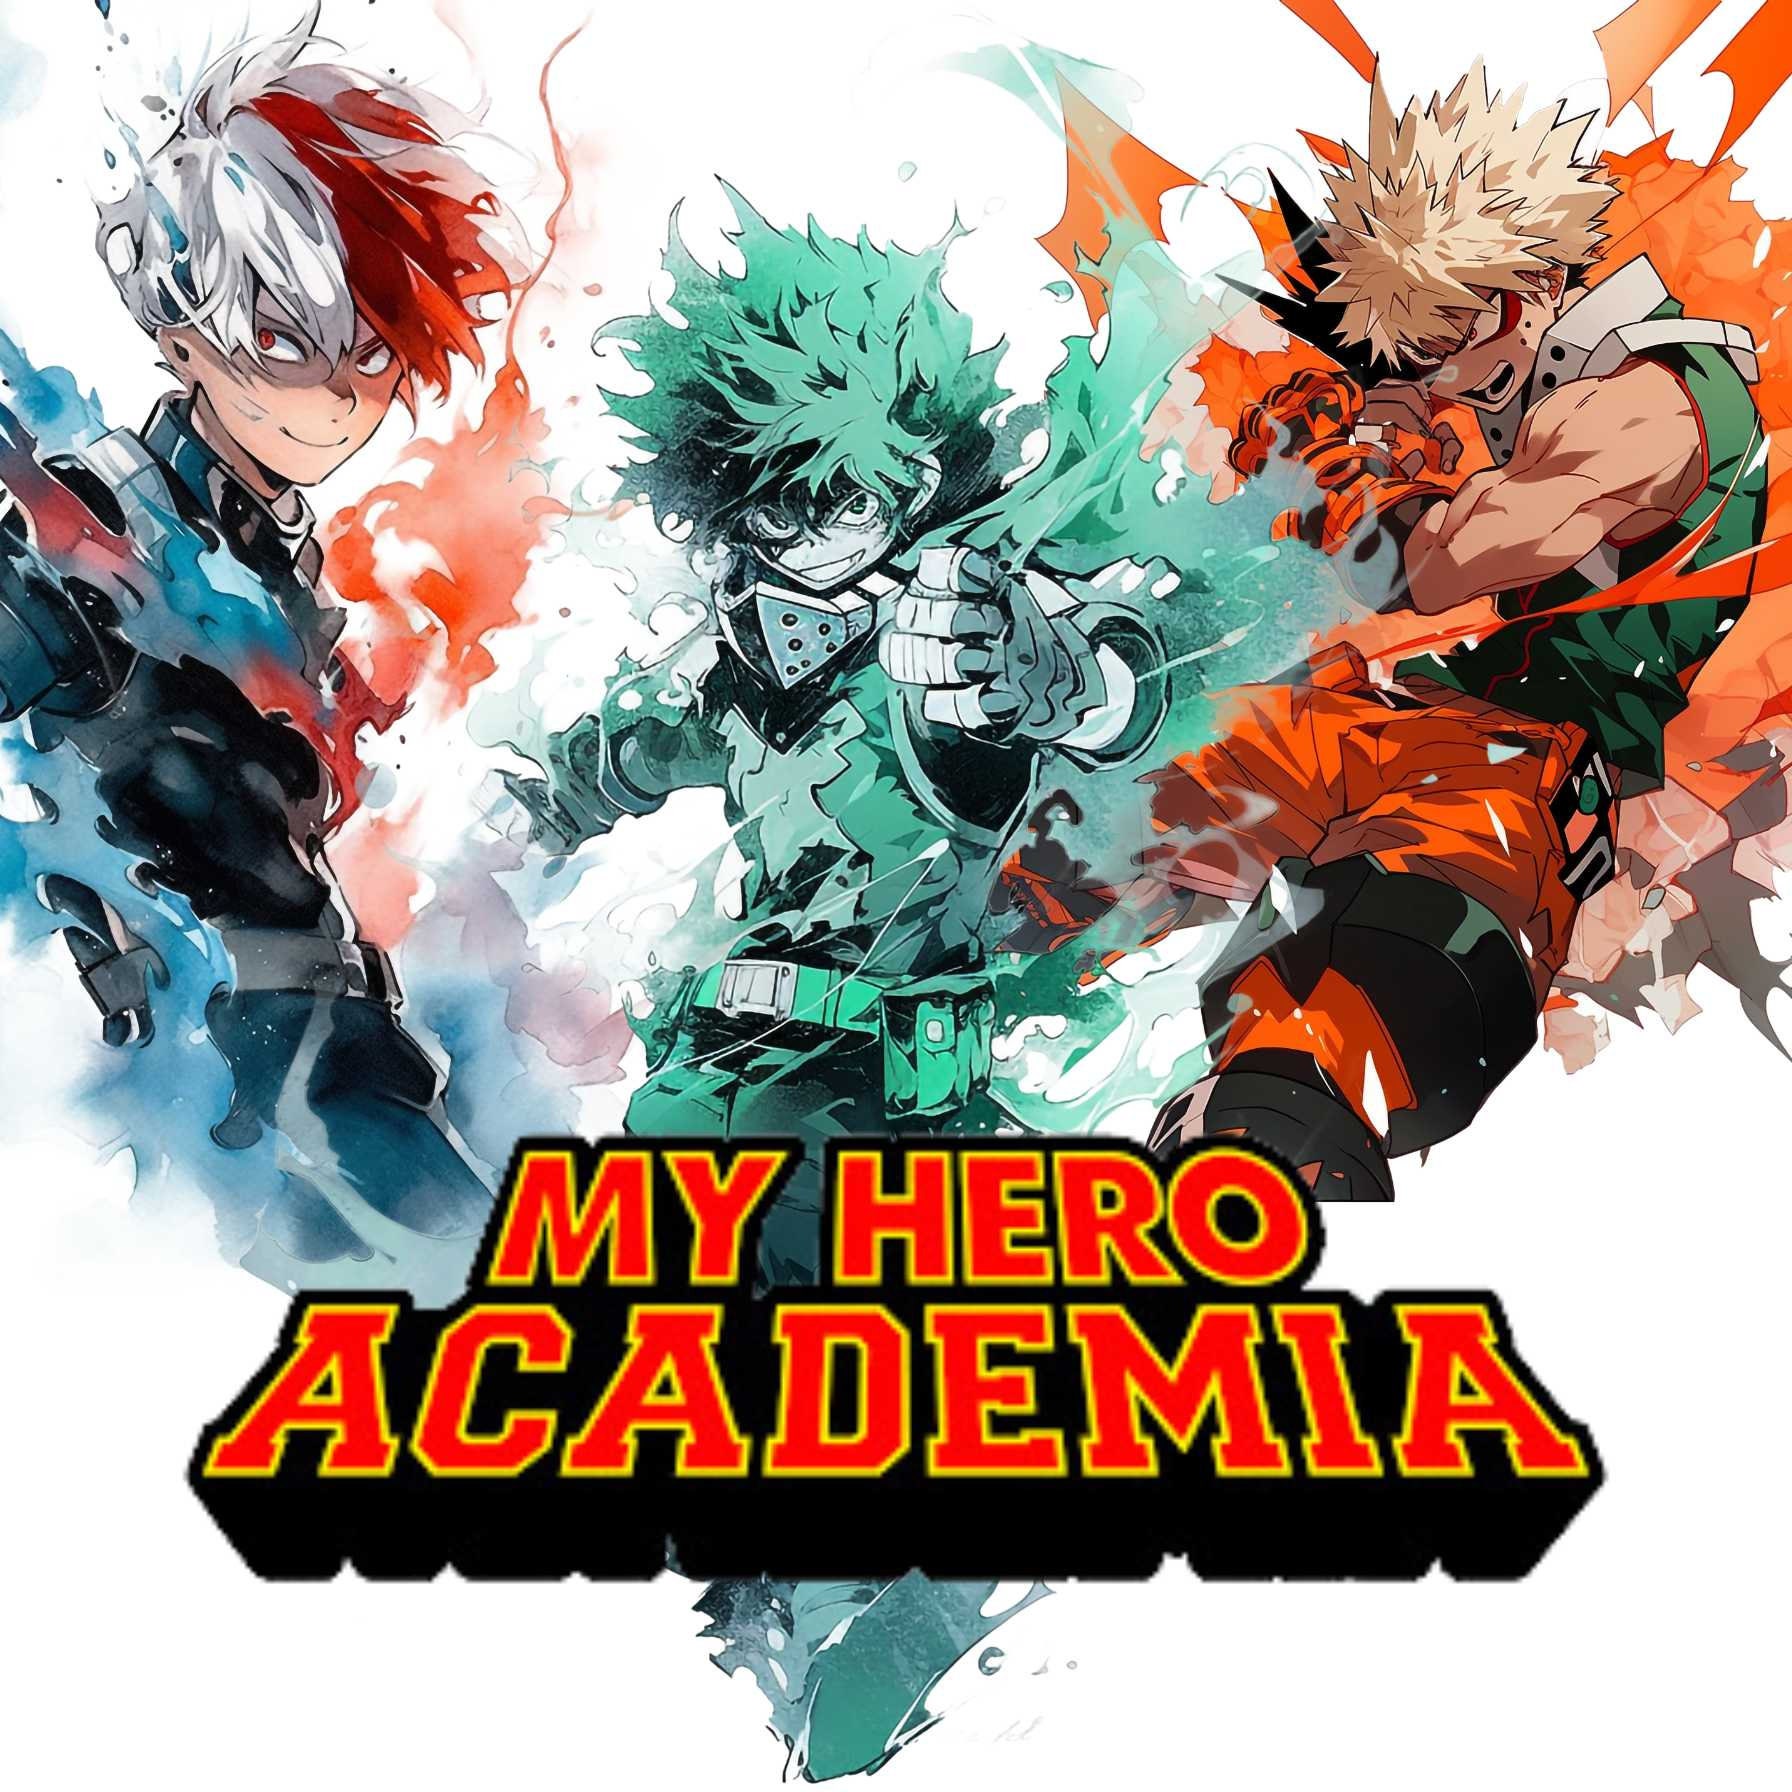 Japanese Anime My Hero Academia Poster Pictures Comics Wall Art Canvas  Painting For Bedroom Living Room Home Decoration Cuadros